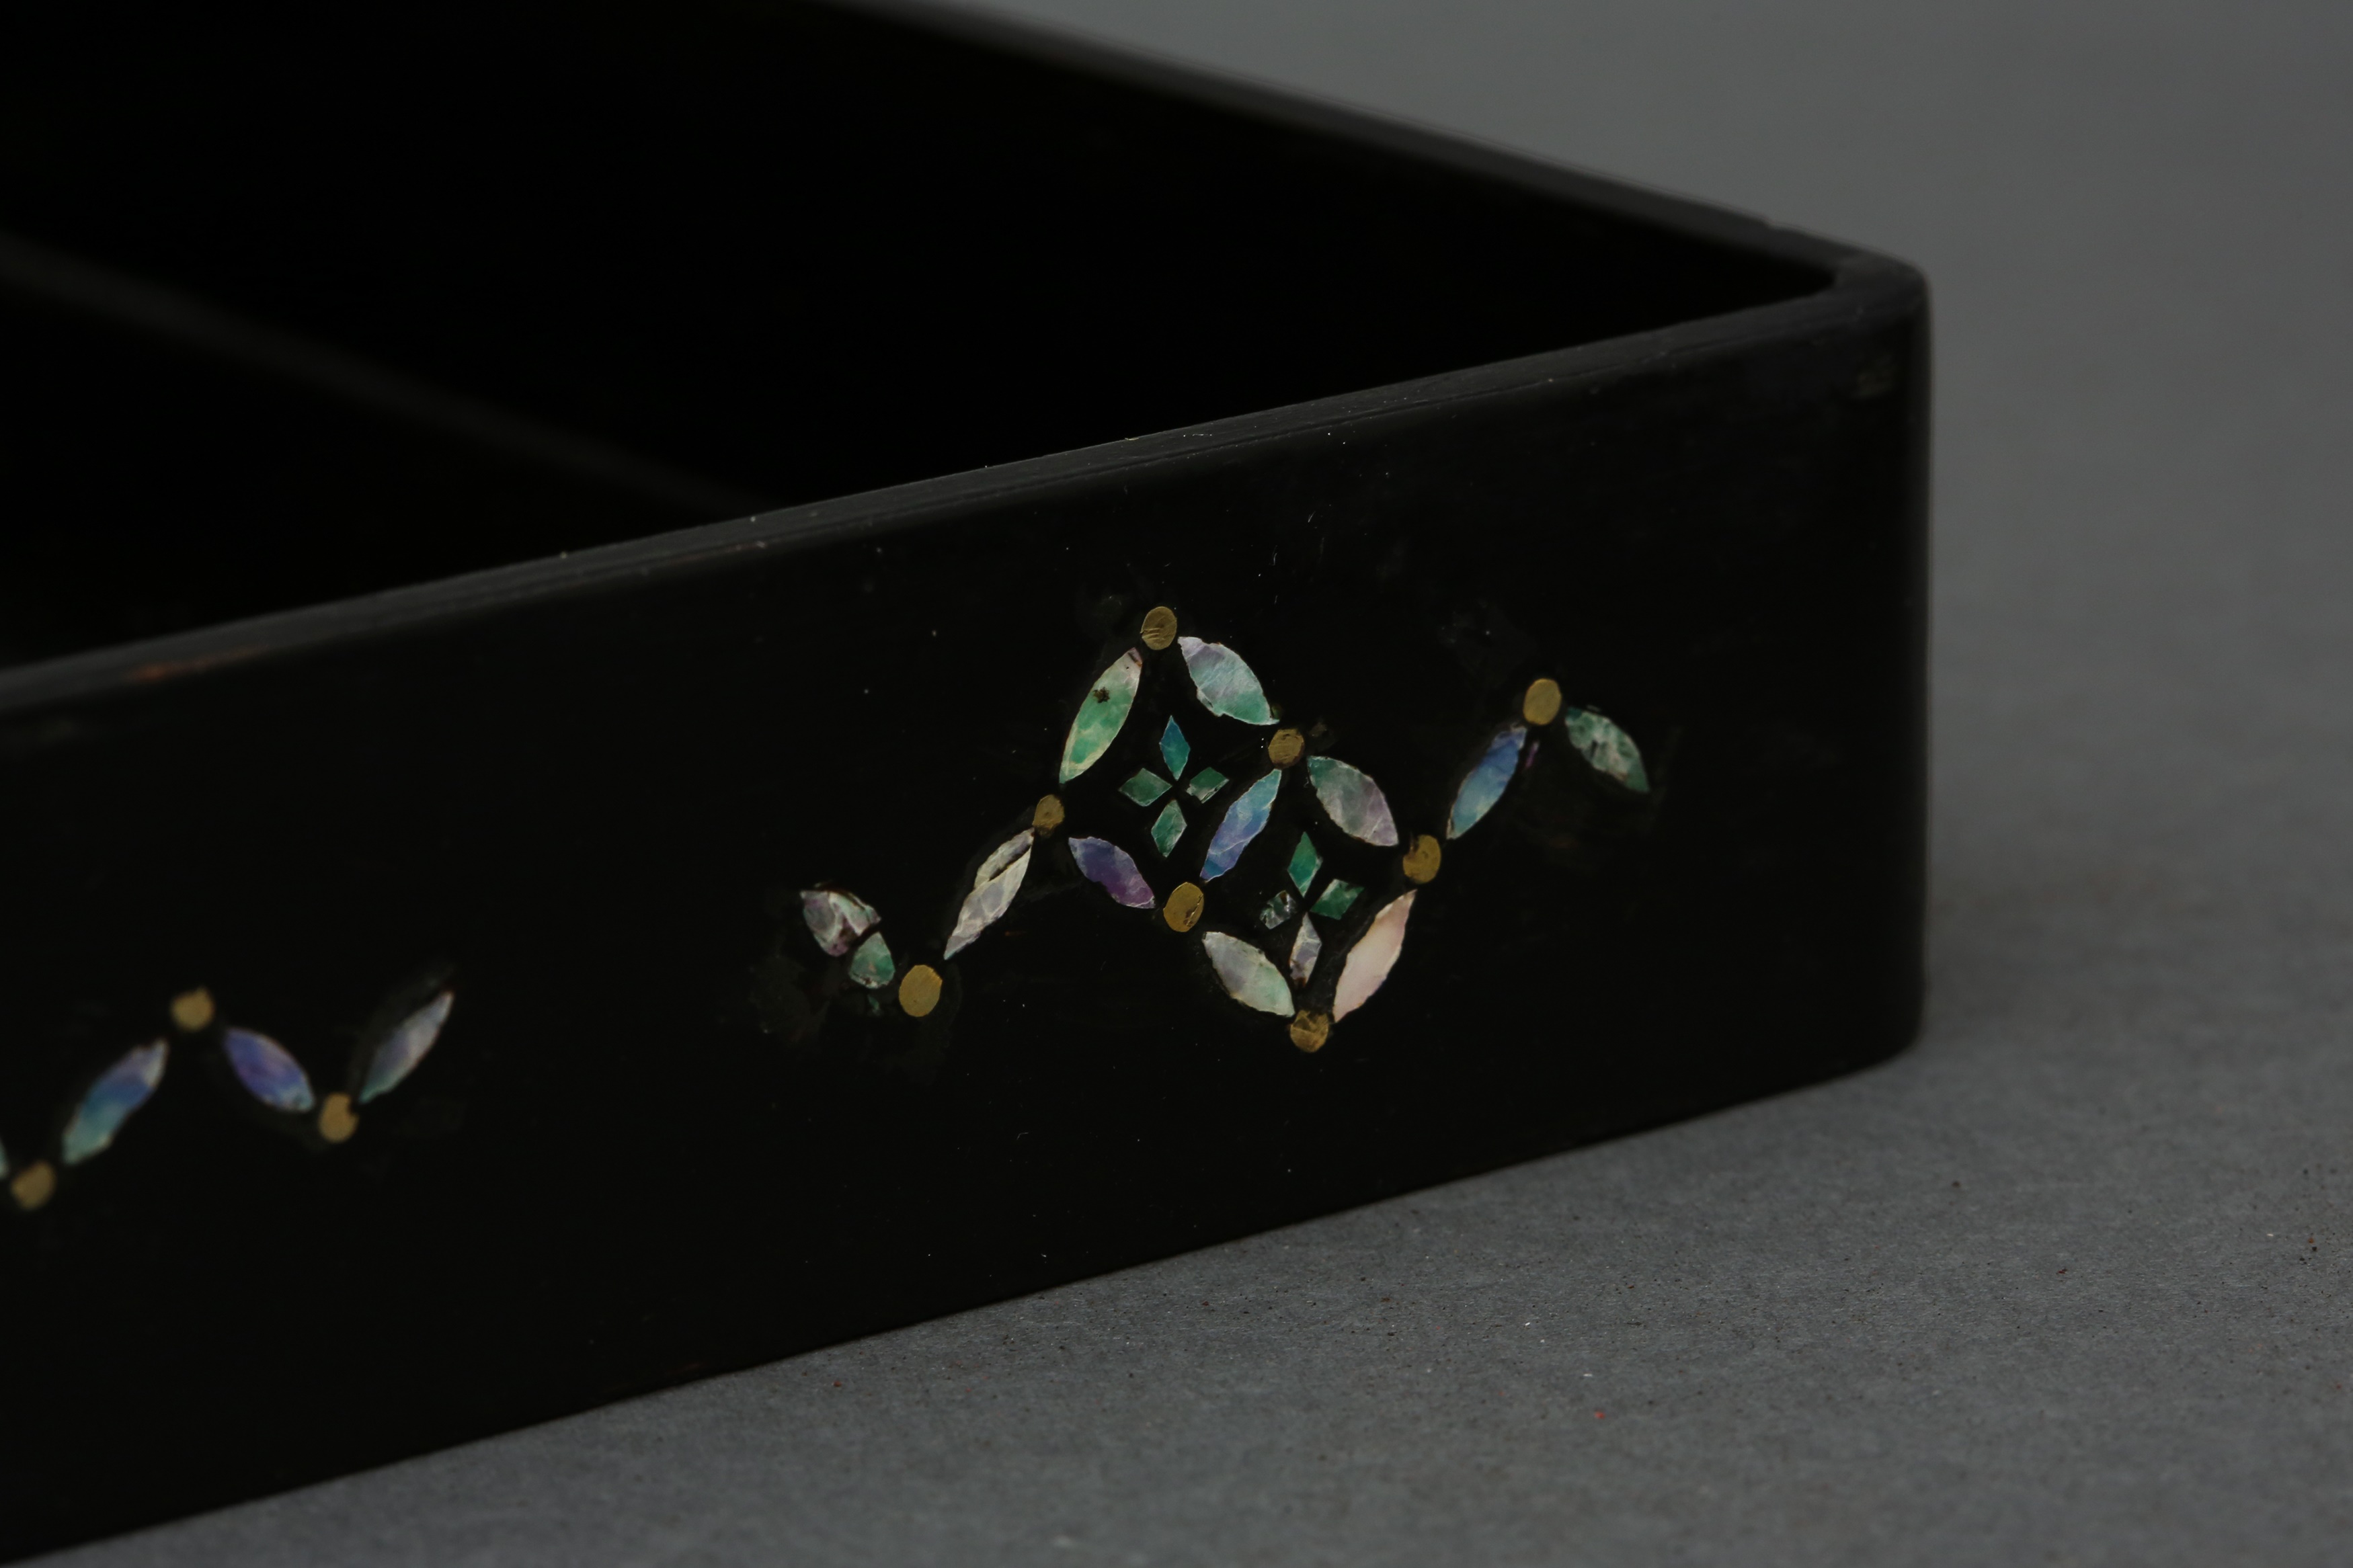 A JAPANESE RYUKYU ISLAND-STYLE MOTHER-OF-PEARL INLAID BLACK LACQUER BOX AND COVER - Image 6 of 7